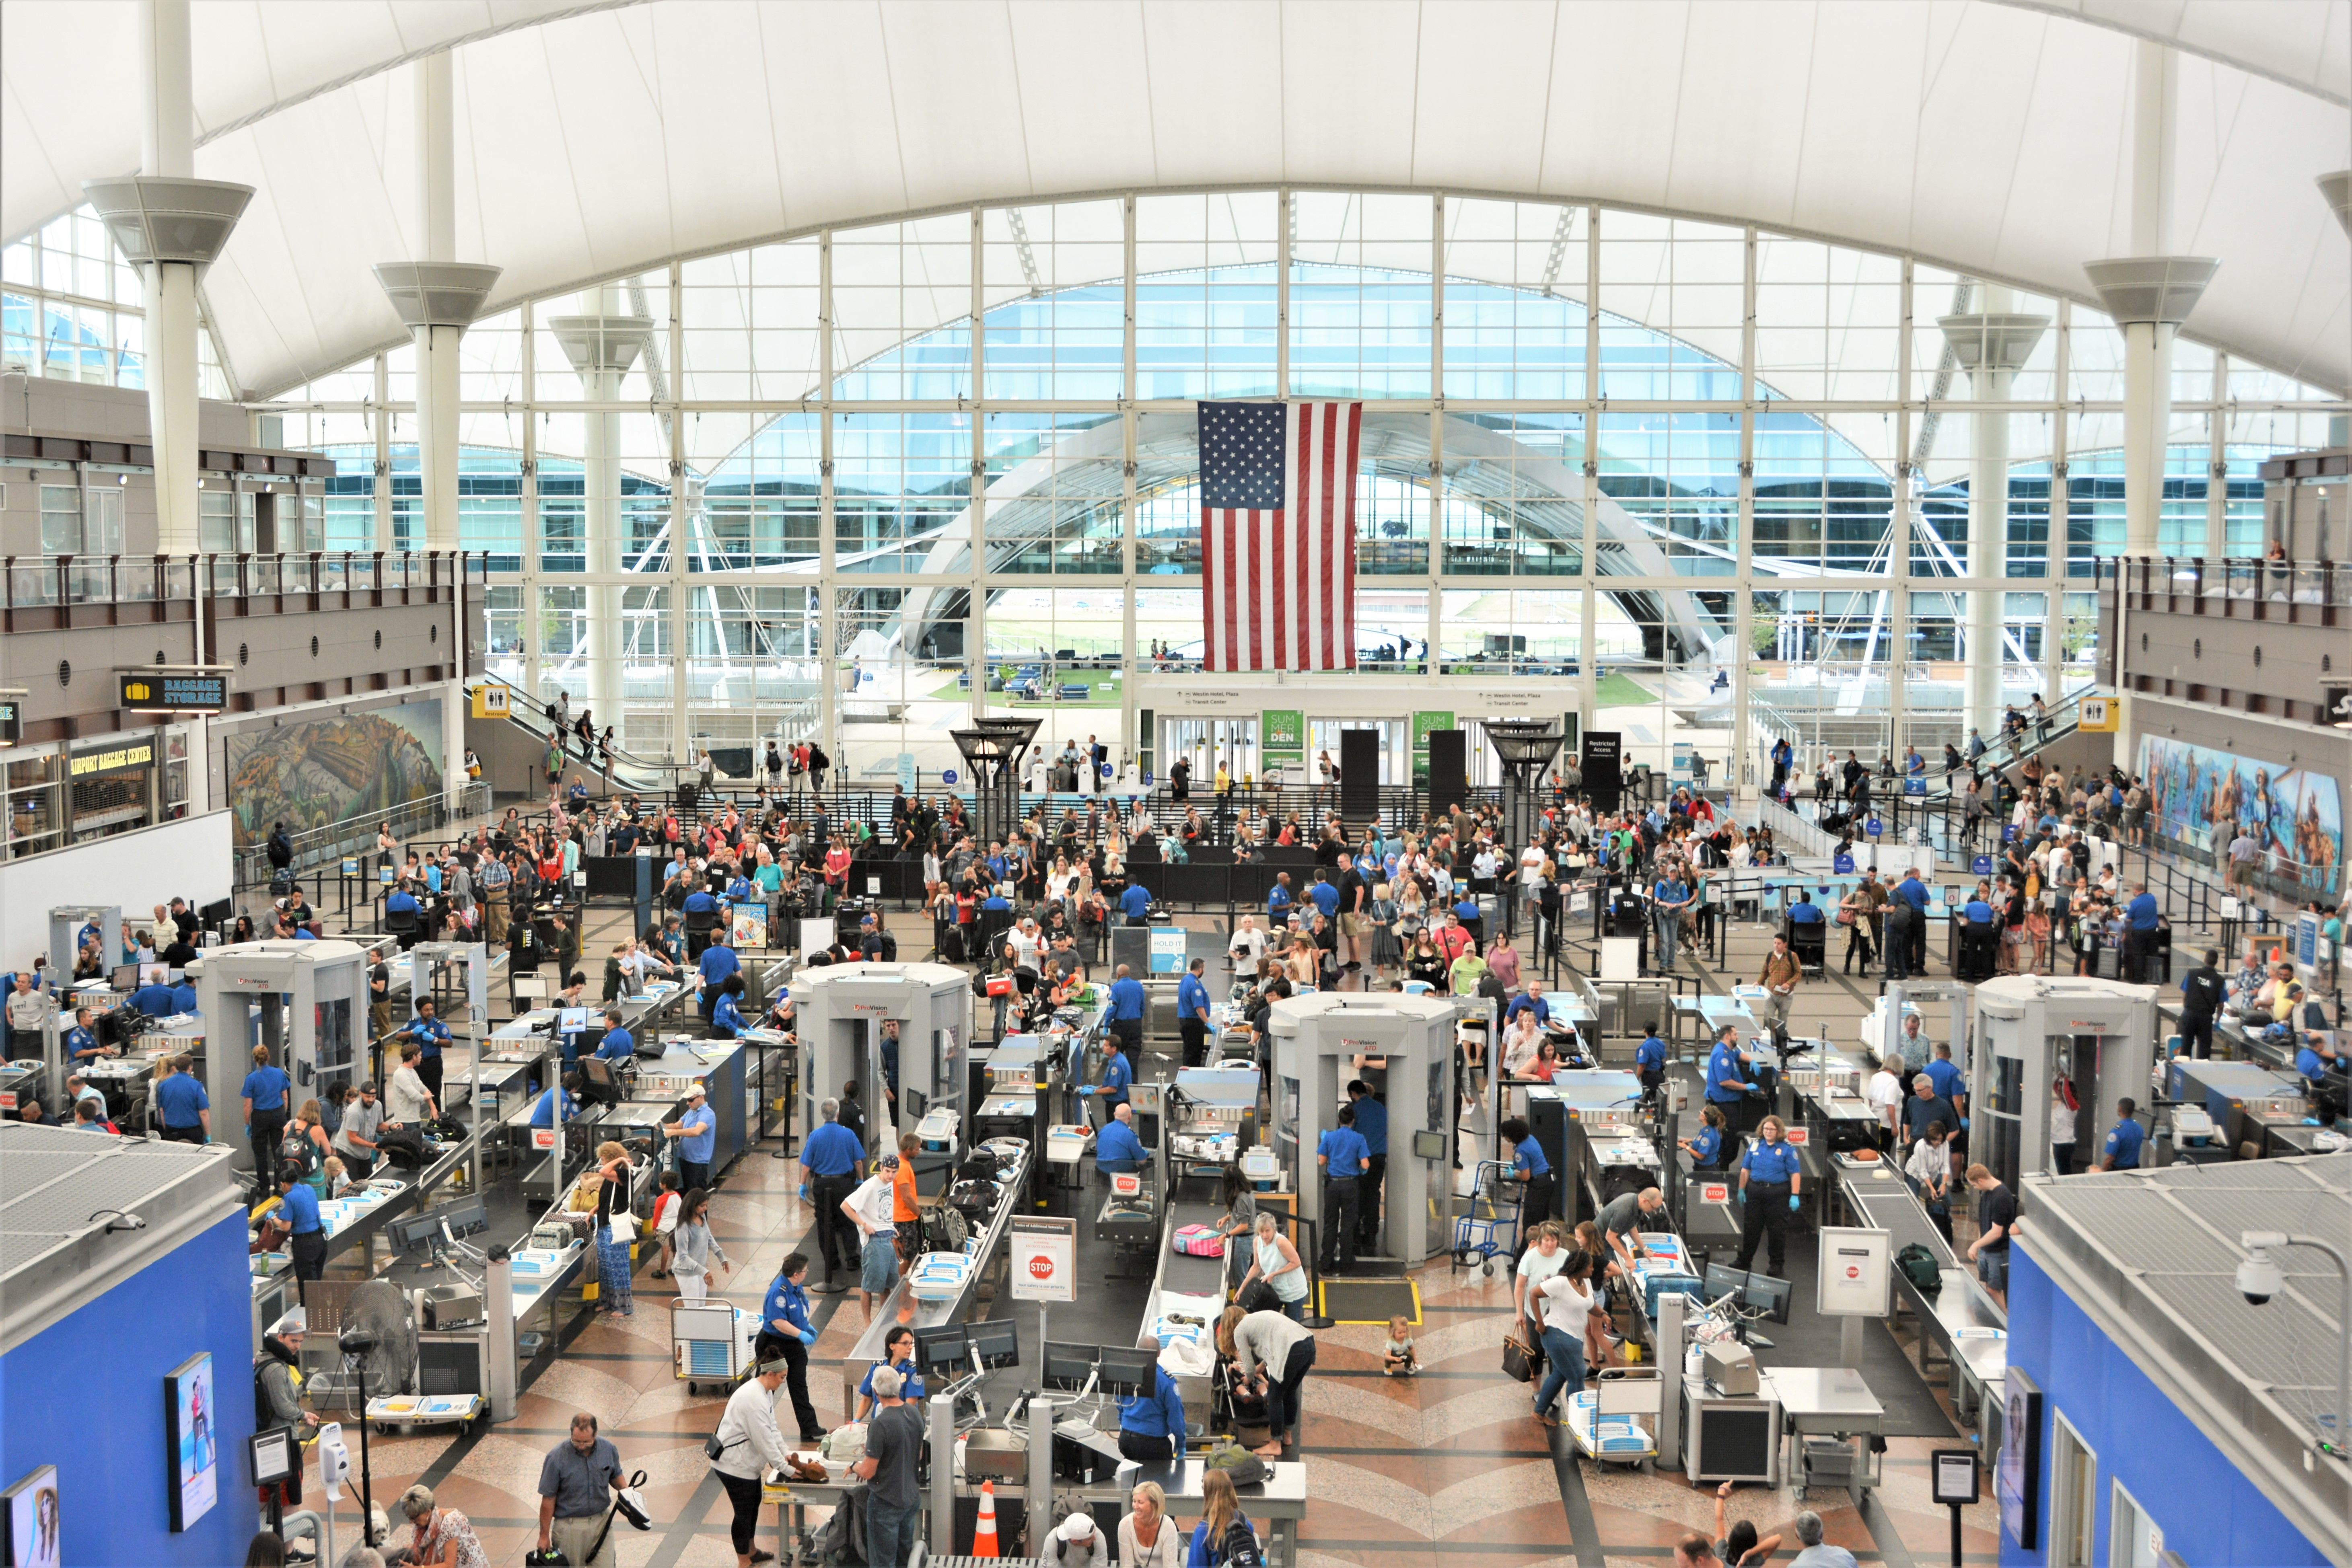 A panoramic view of the TSA Security Screening Checkpoint at Denver Airport.